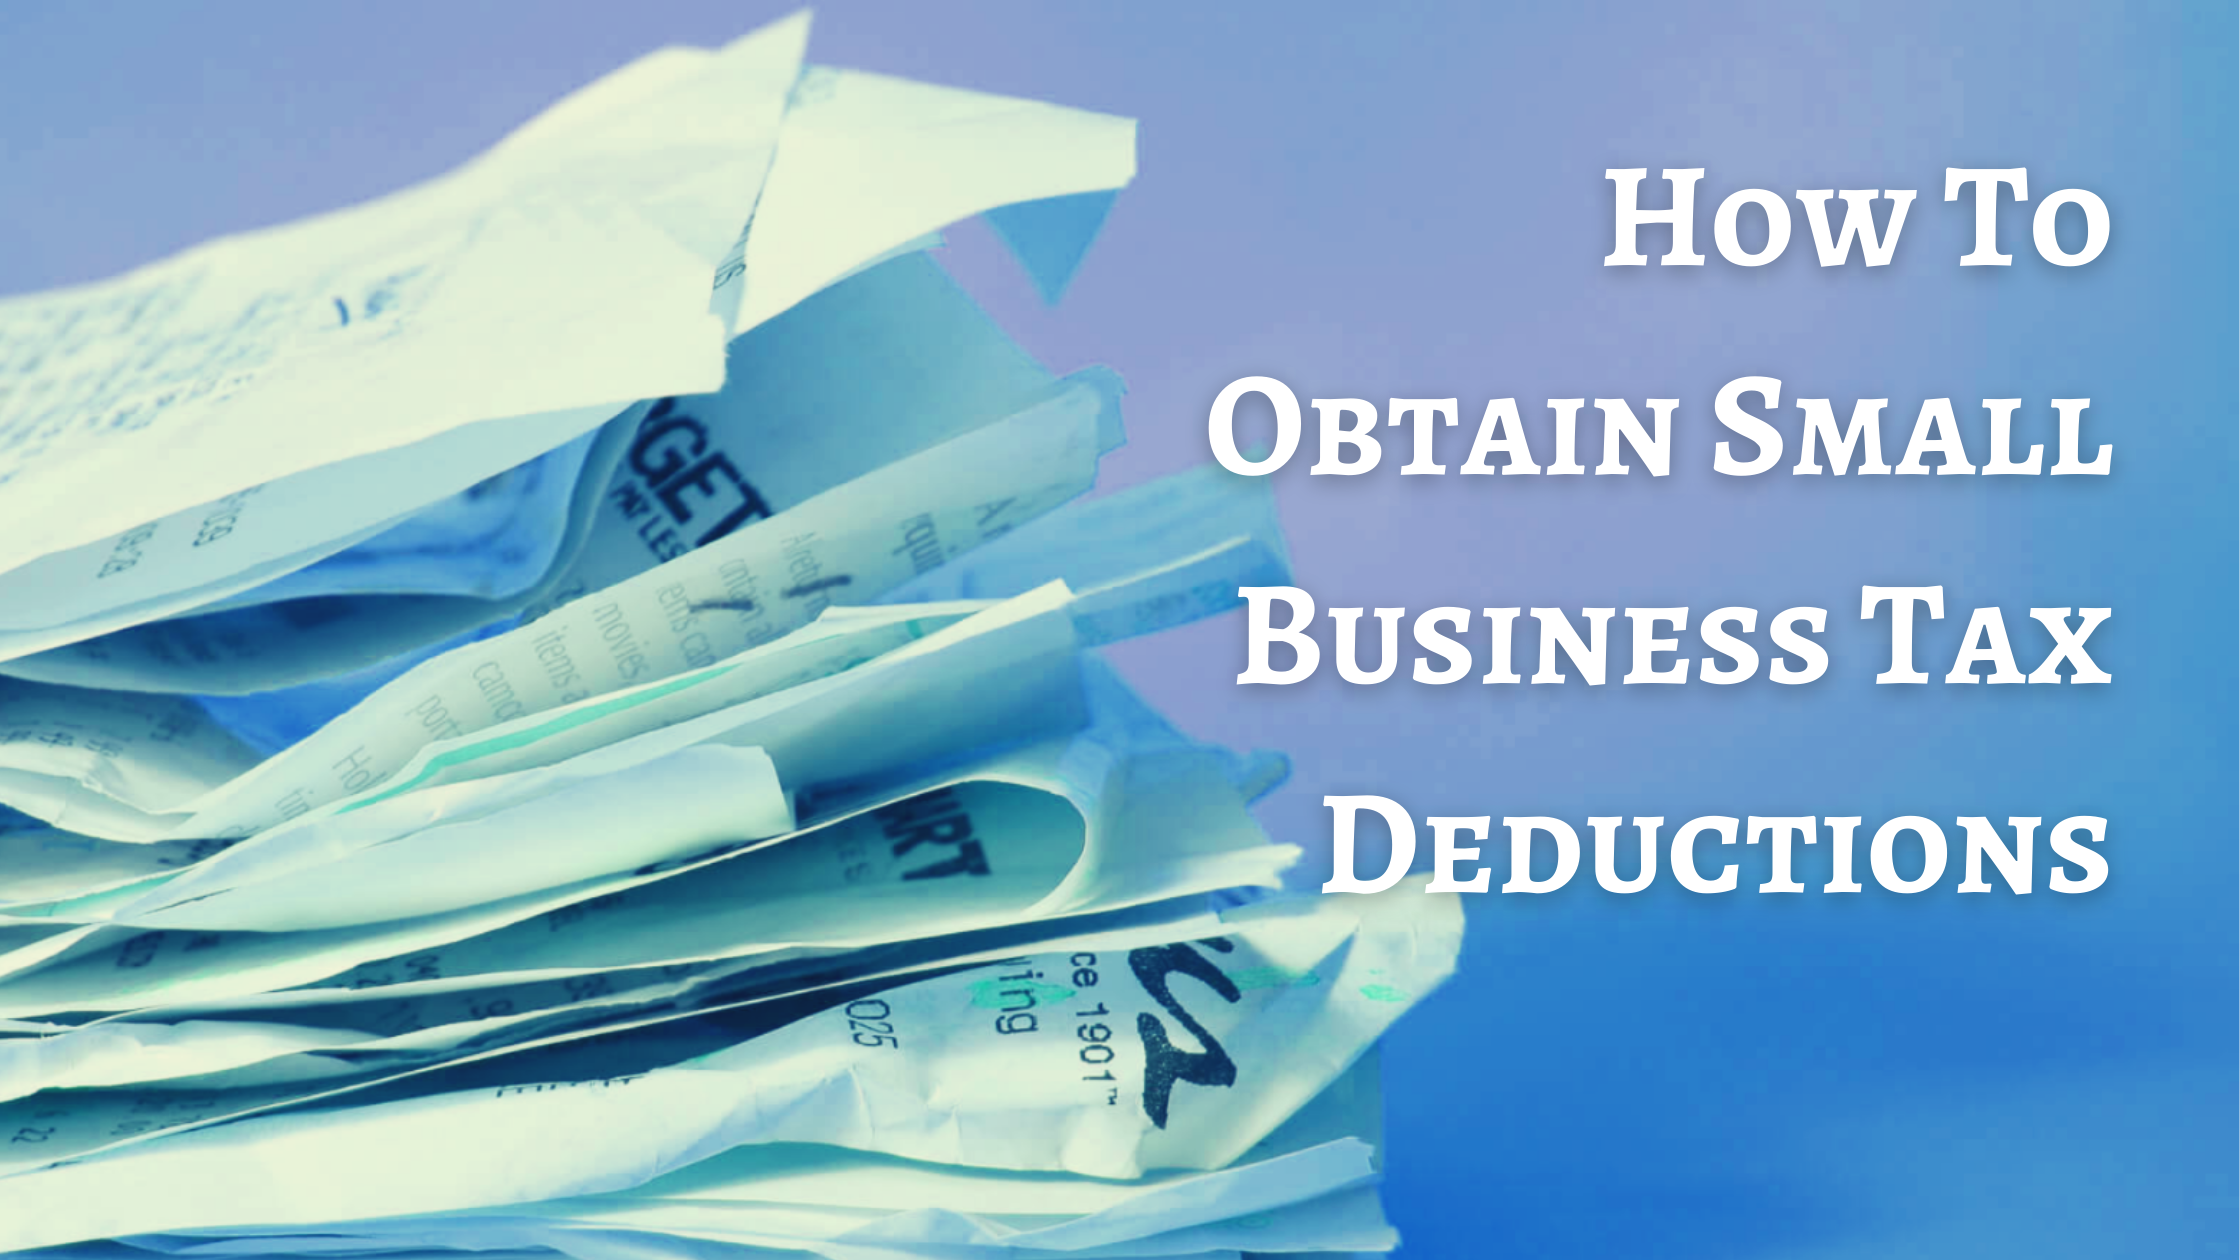 How To Get Tax Write-offs For Small Business